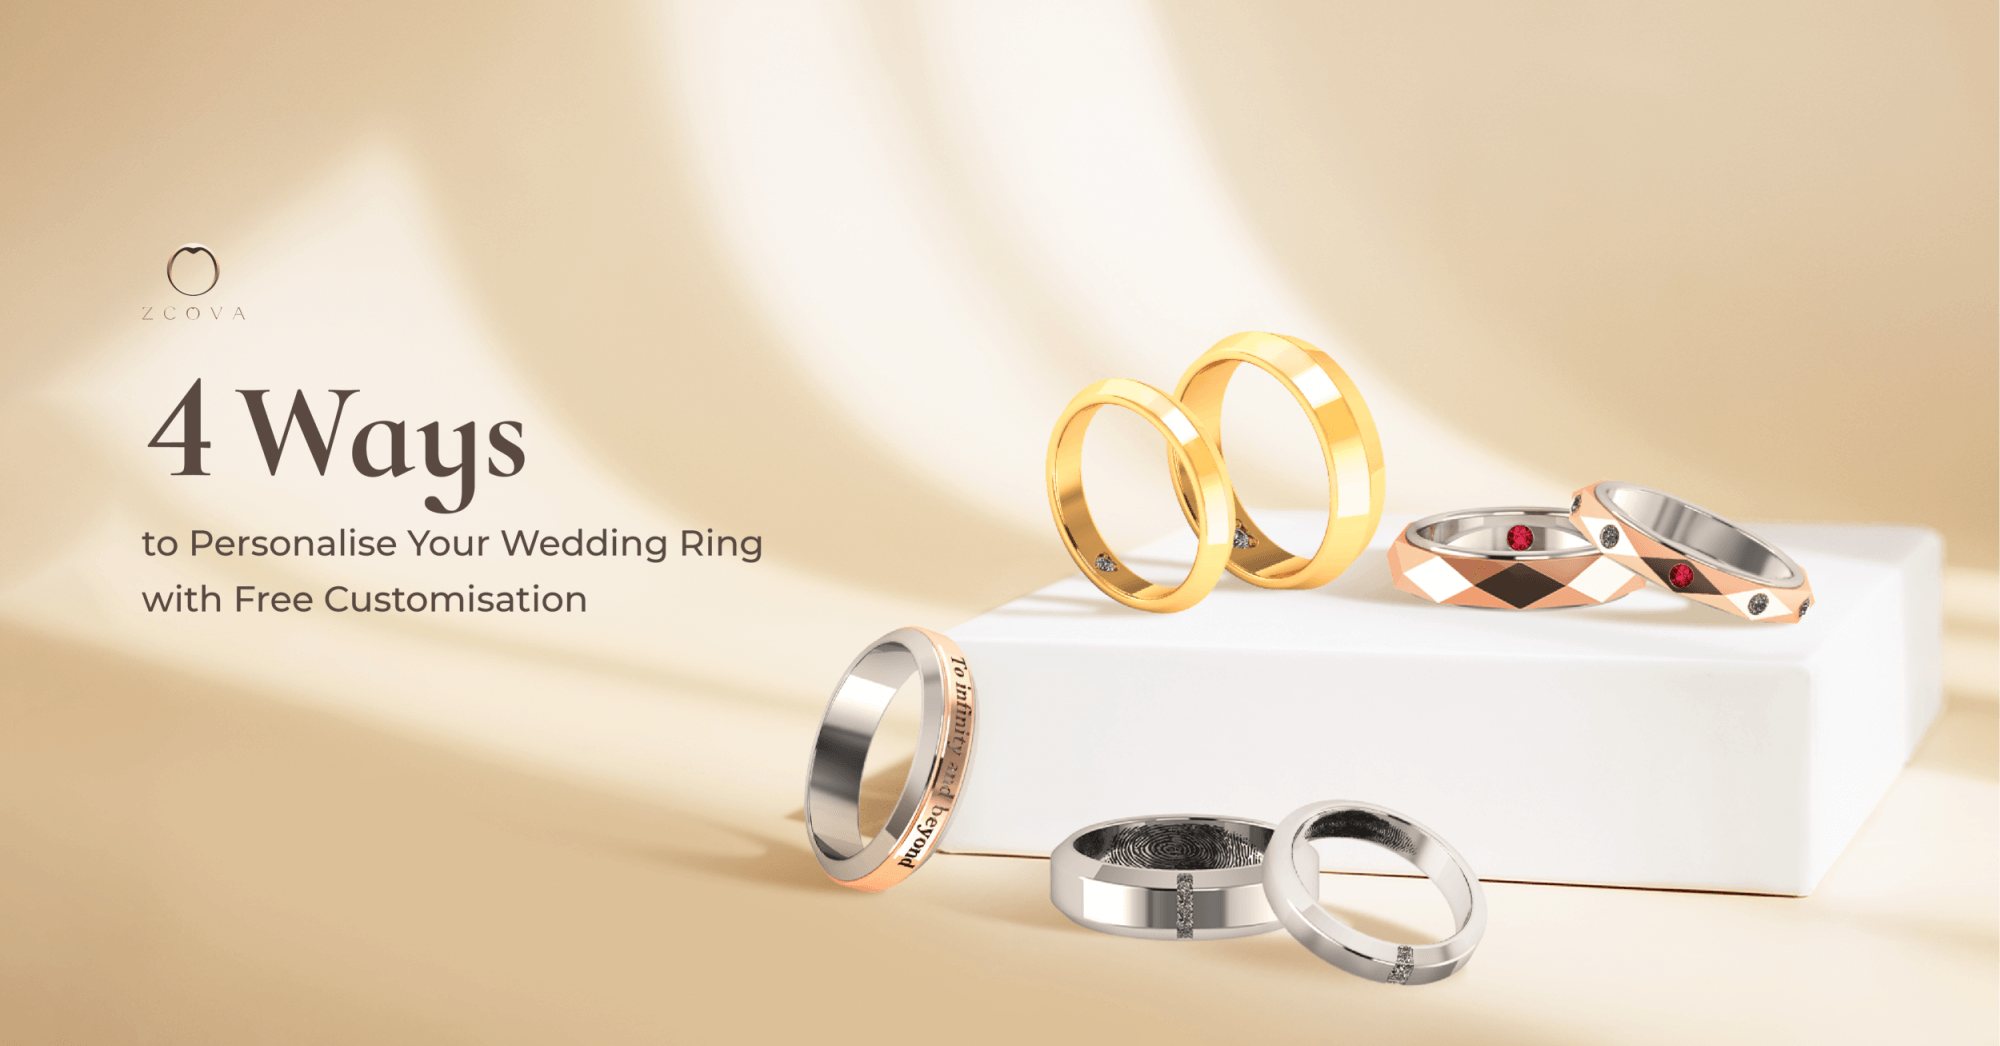 4 ways to personalise your wedding ring with free customisation